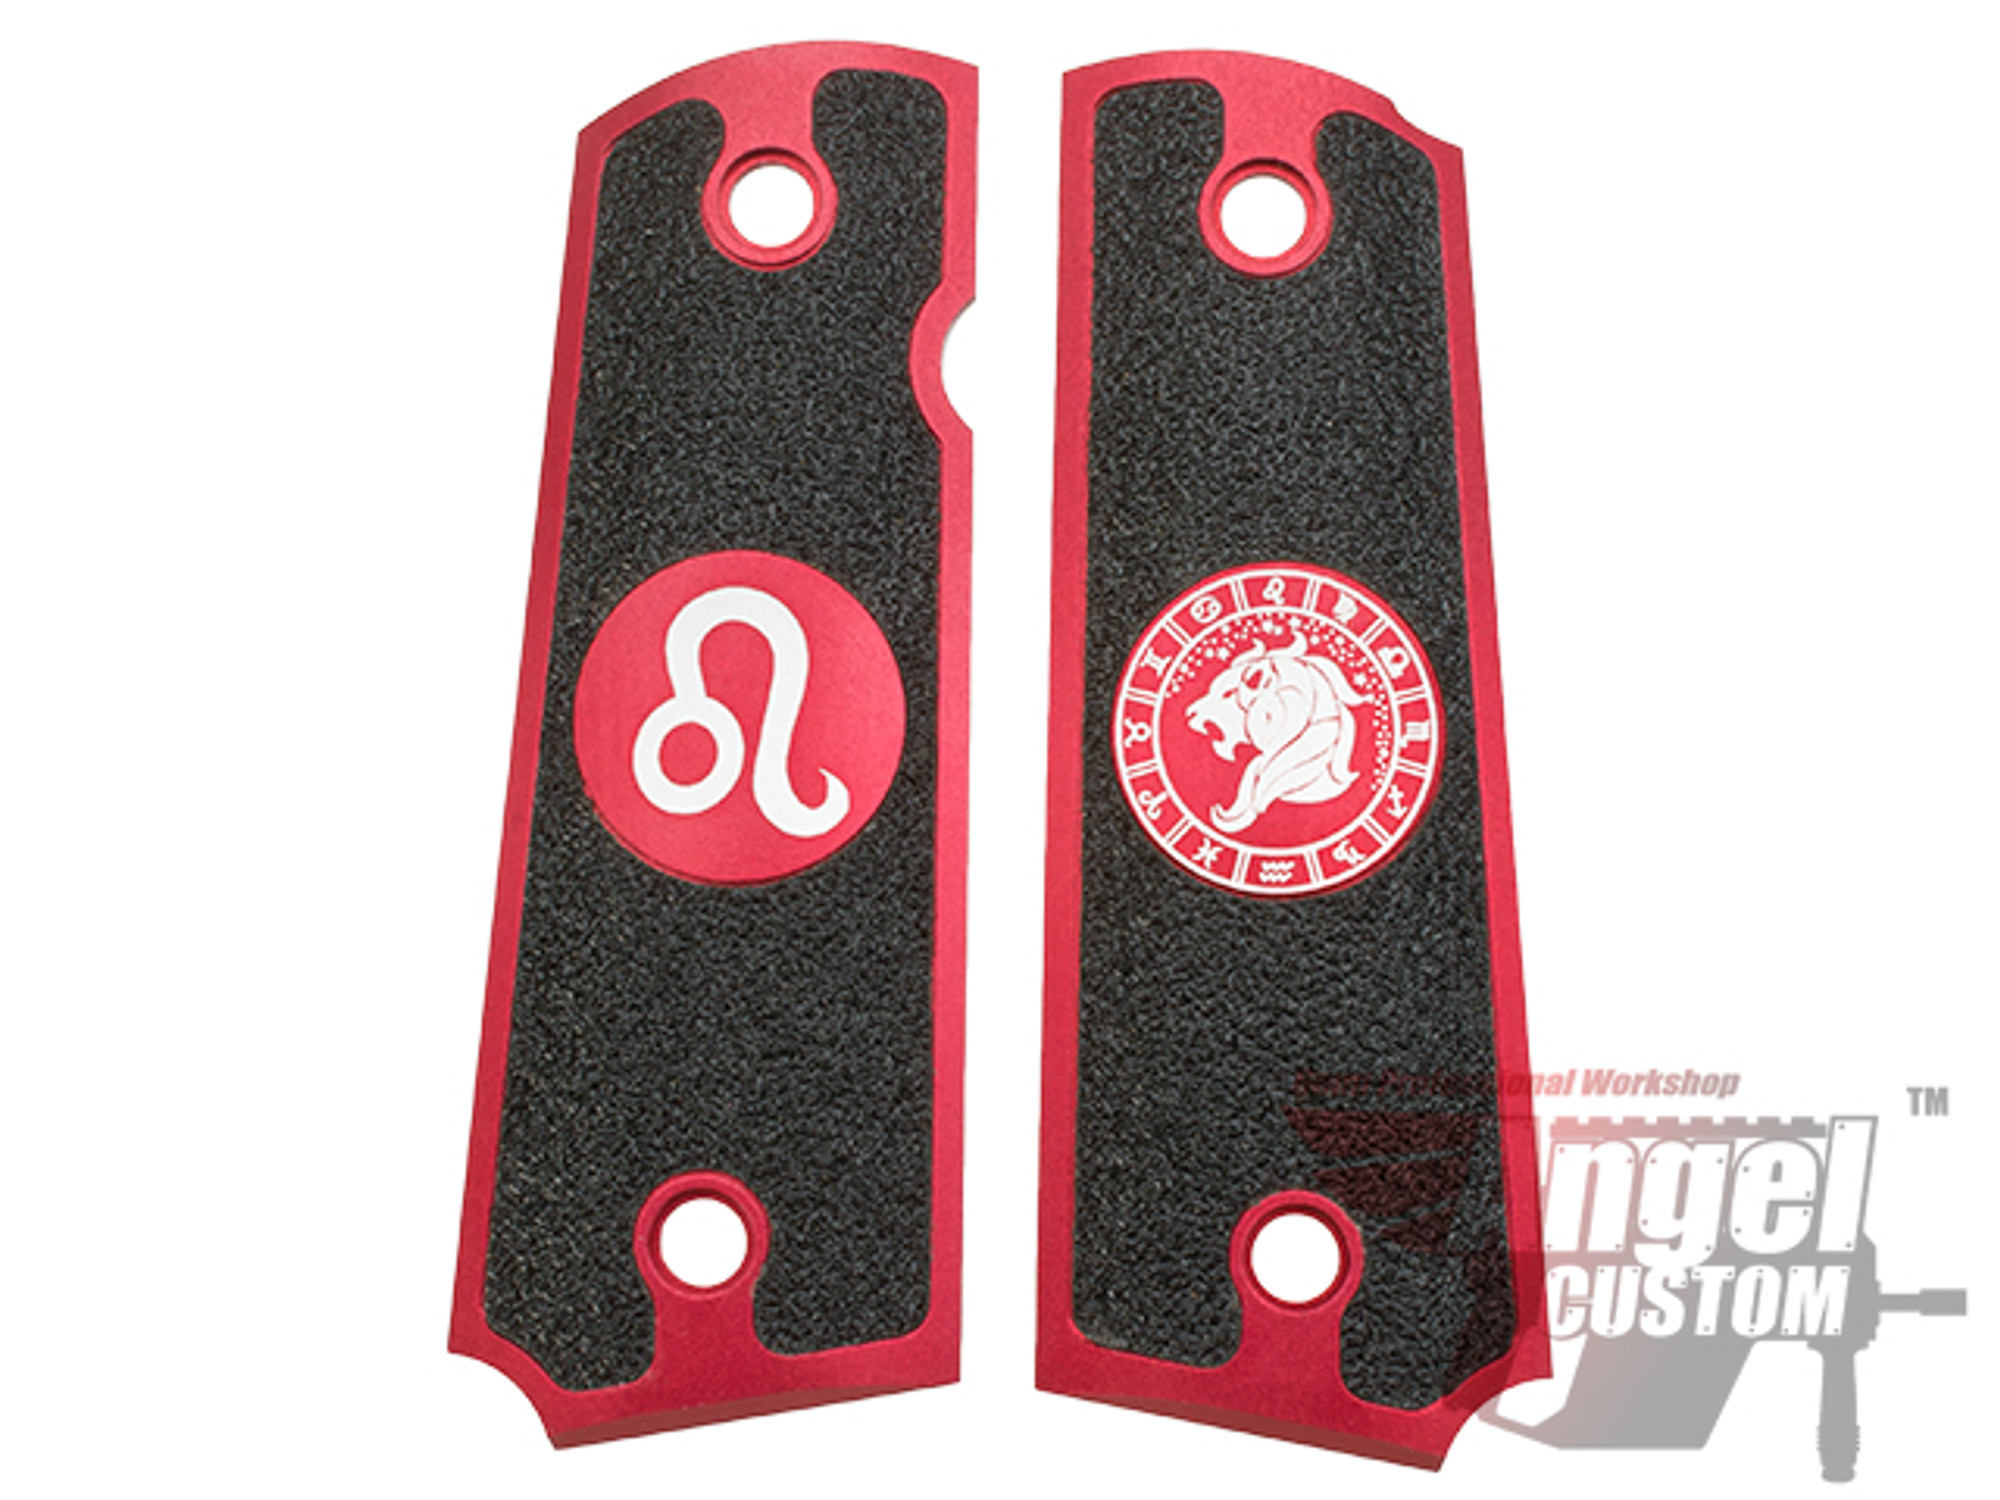 Angel Custom CNC Machined Tac-GLove "Zodiac" Grips for WE-Tech 1911 Series Airsoft Pistols - Leo (Red)